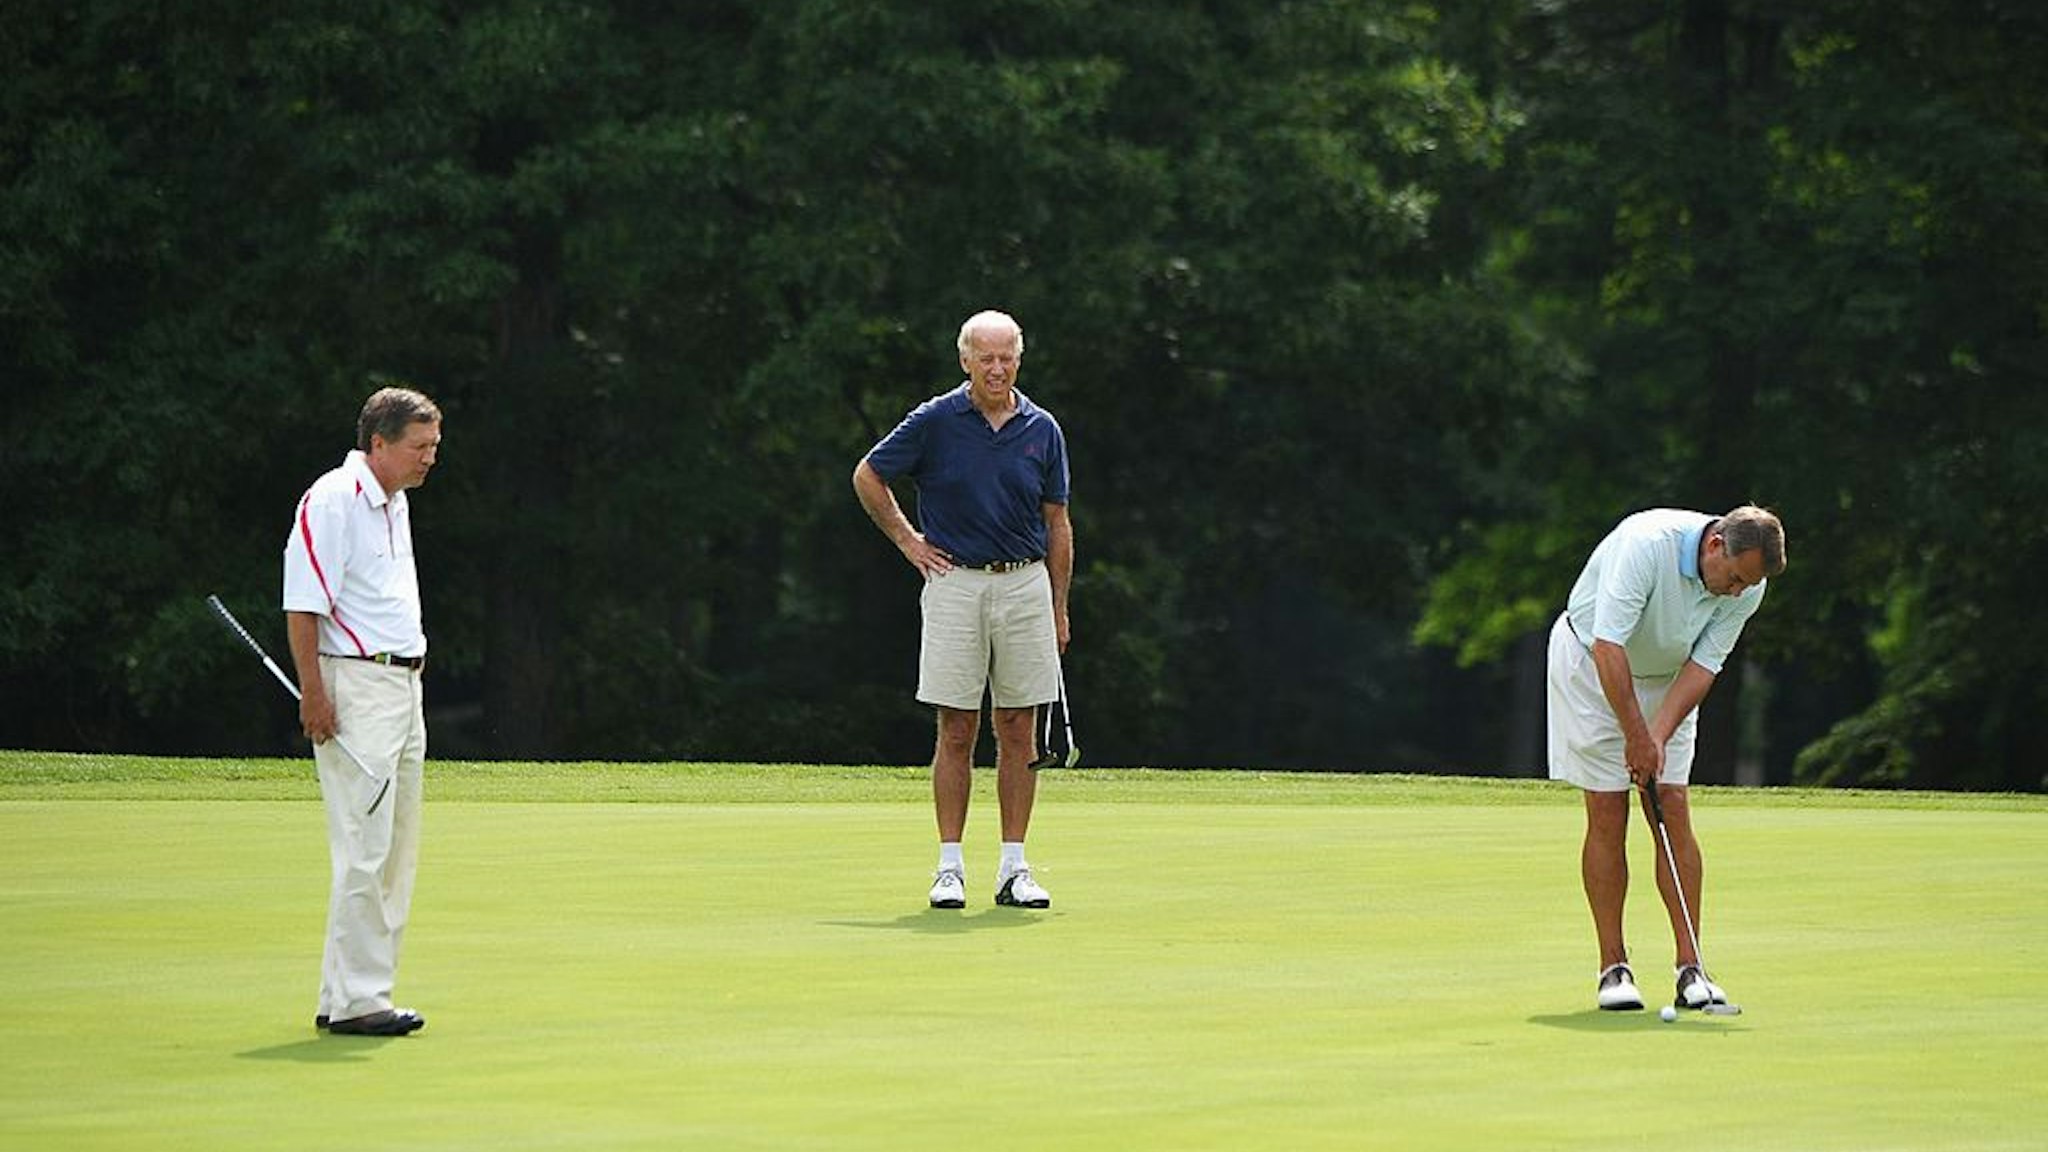 House Speaker John Boehner (R) putts on the first hole watched by Ohio Governor John Kasich (L), and Vice President Joe Biden during a game of golf June 18, 2011 at Andrews Air Force Base in Maryland. AFP PHOTO/Mandel NGAN (Photo credit should read MANDEL NGAN/AFP via Getty Images)